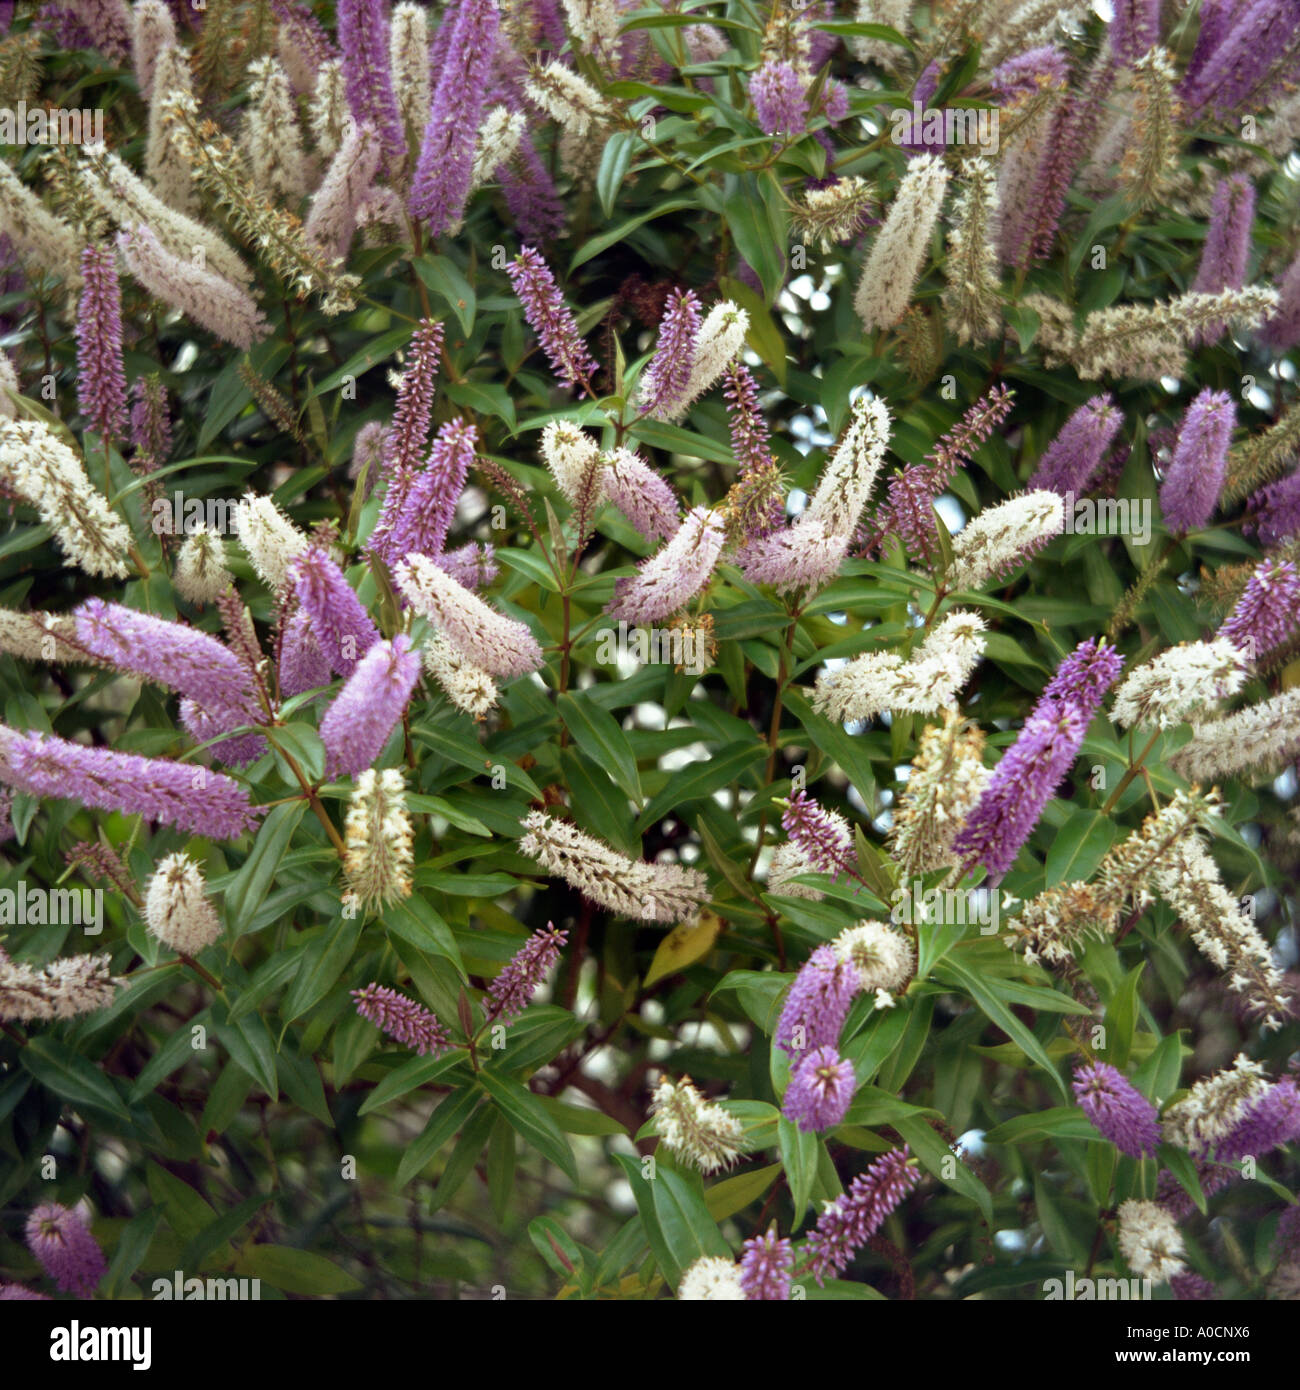 Buddleia with purple and white flowers Stock Photo